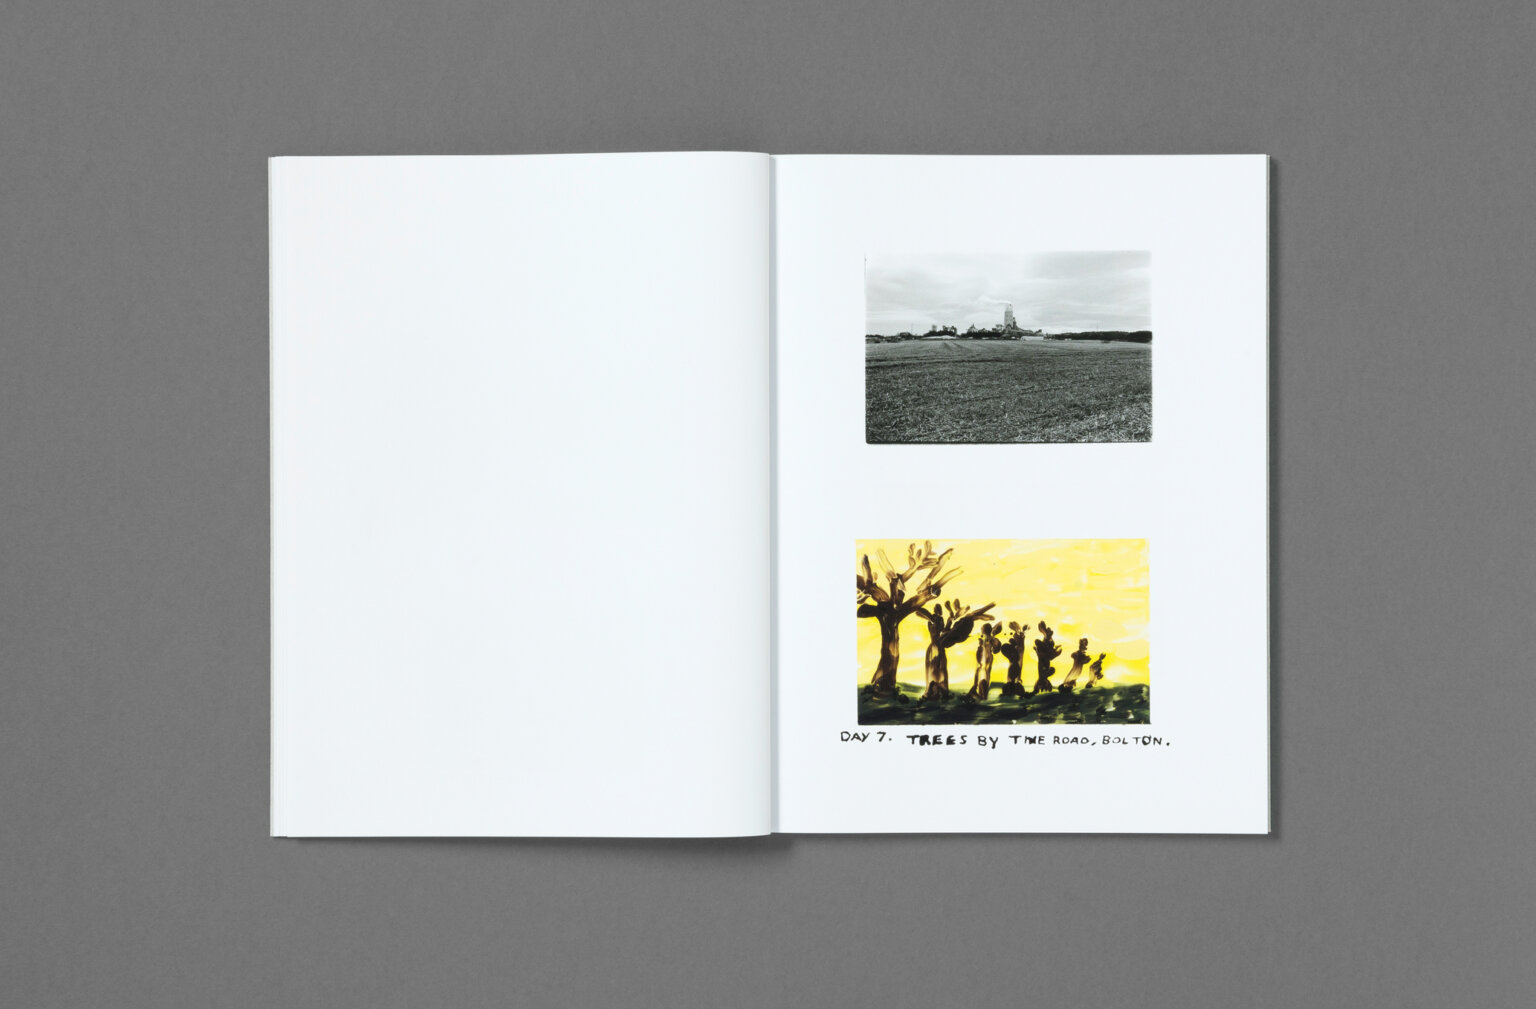 Holy Island by Kingsley Ifill and Danny Fox is published by Loose Joints. © Kingsley Ifill and Danny Fox 2022 Courtesy of Loose Joints.